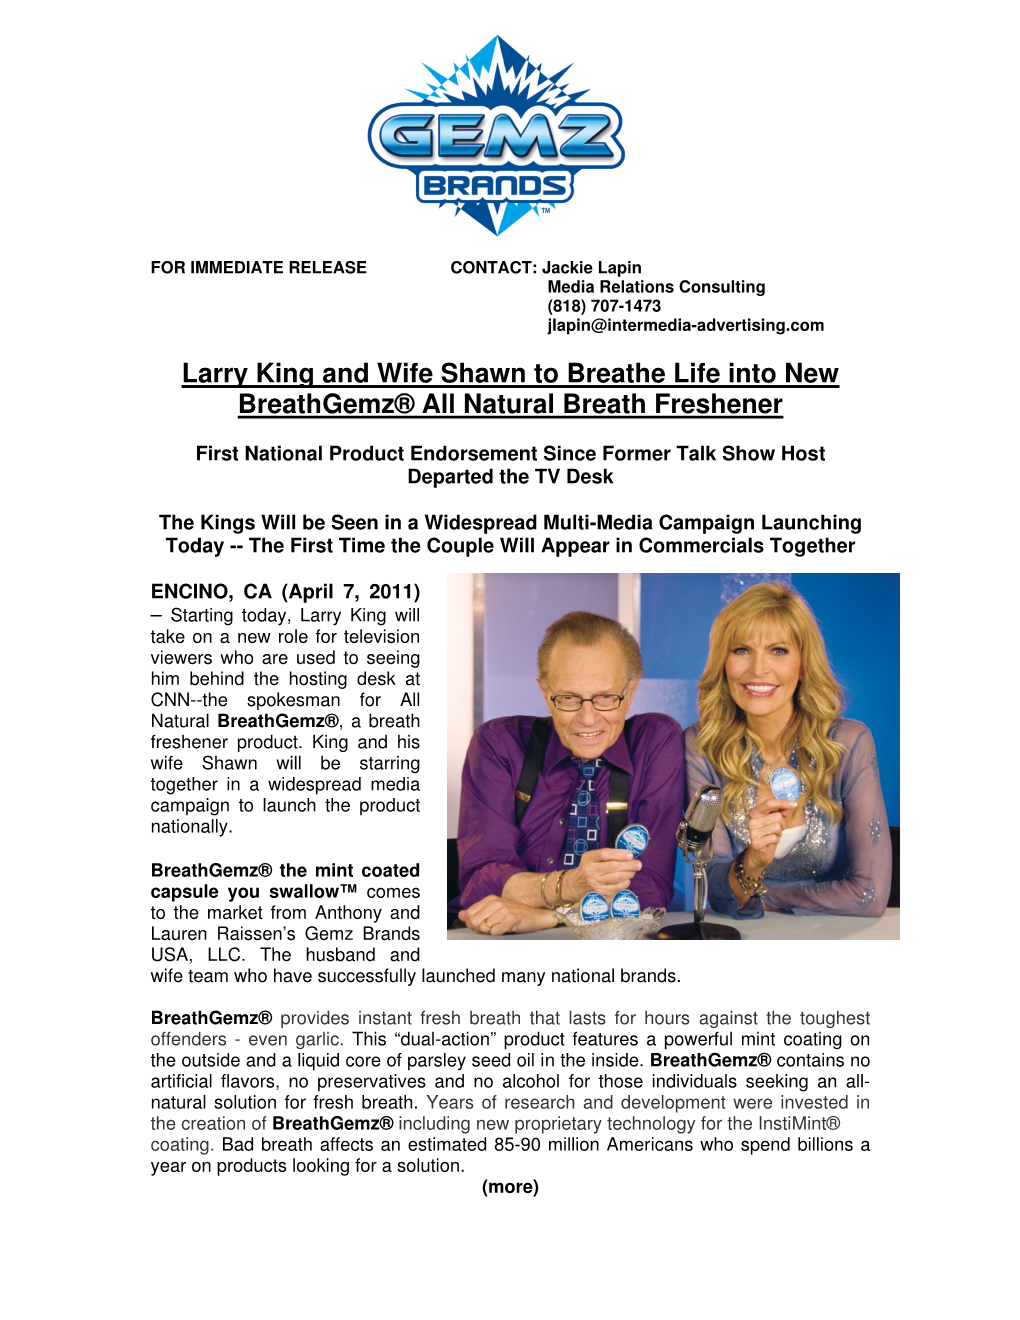 Larry King and Wife Shawn to Breathe Life Into New Breathgemz® All Natural Breath Freshener